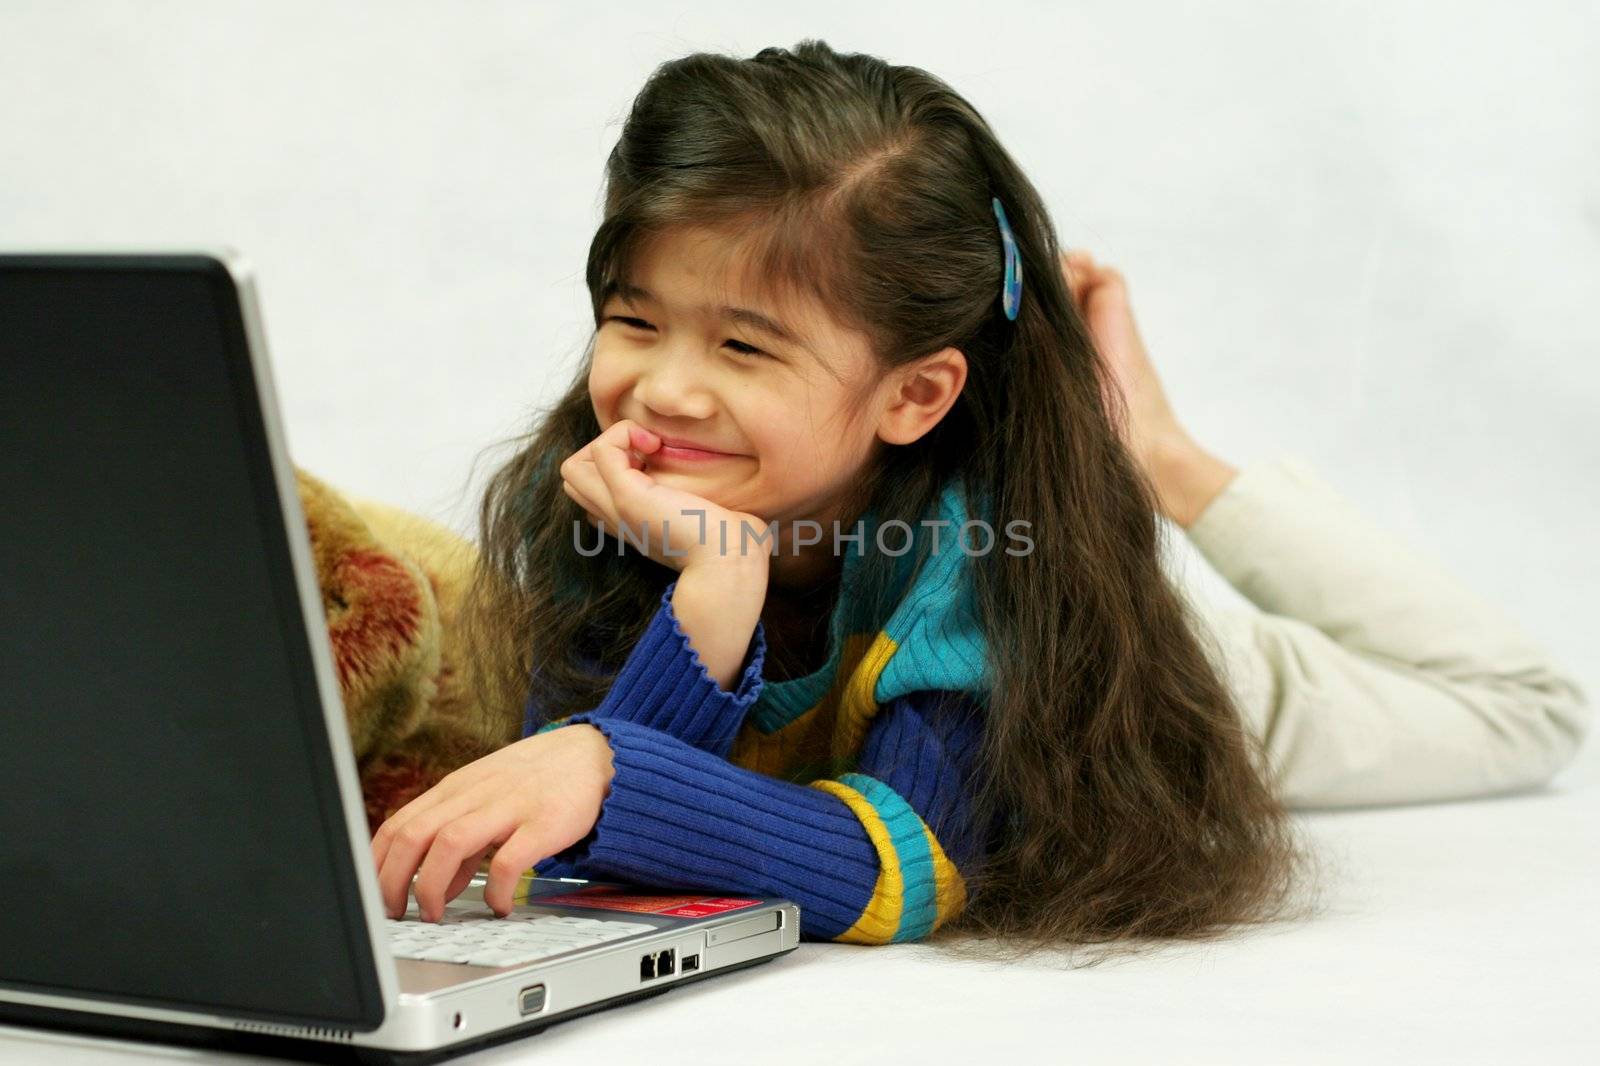 Five year old playing on laptop